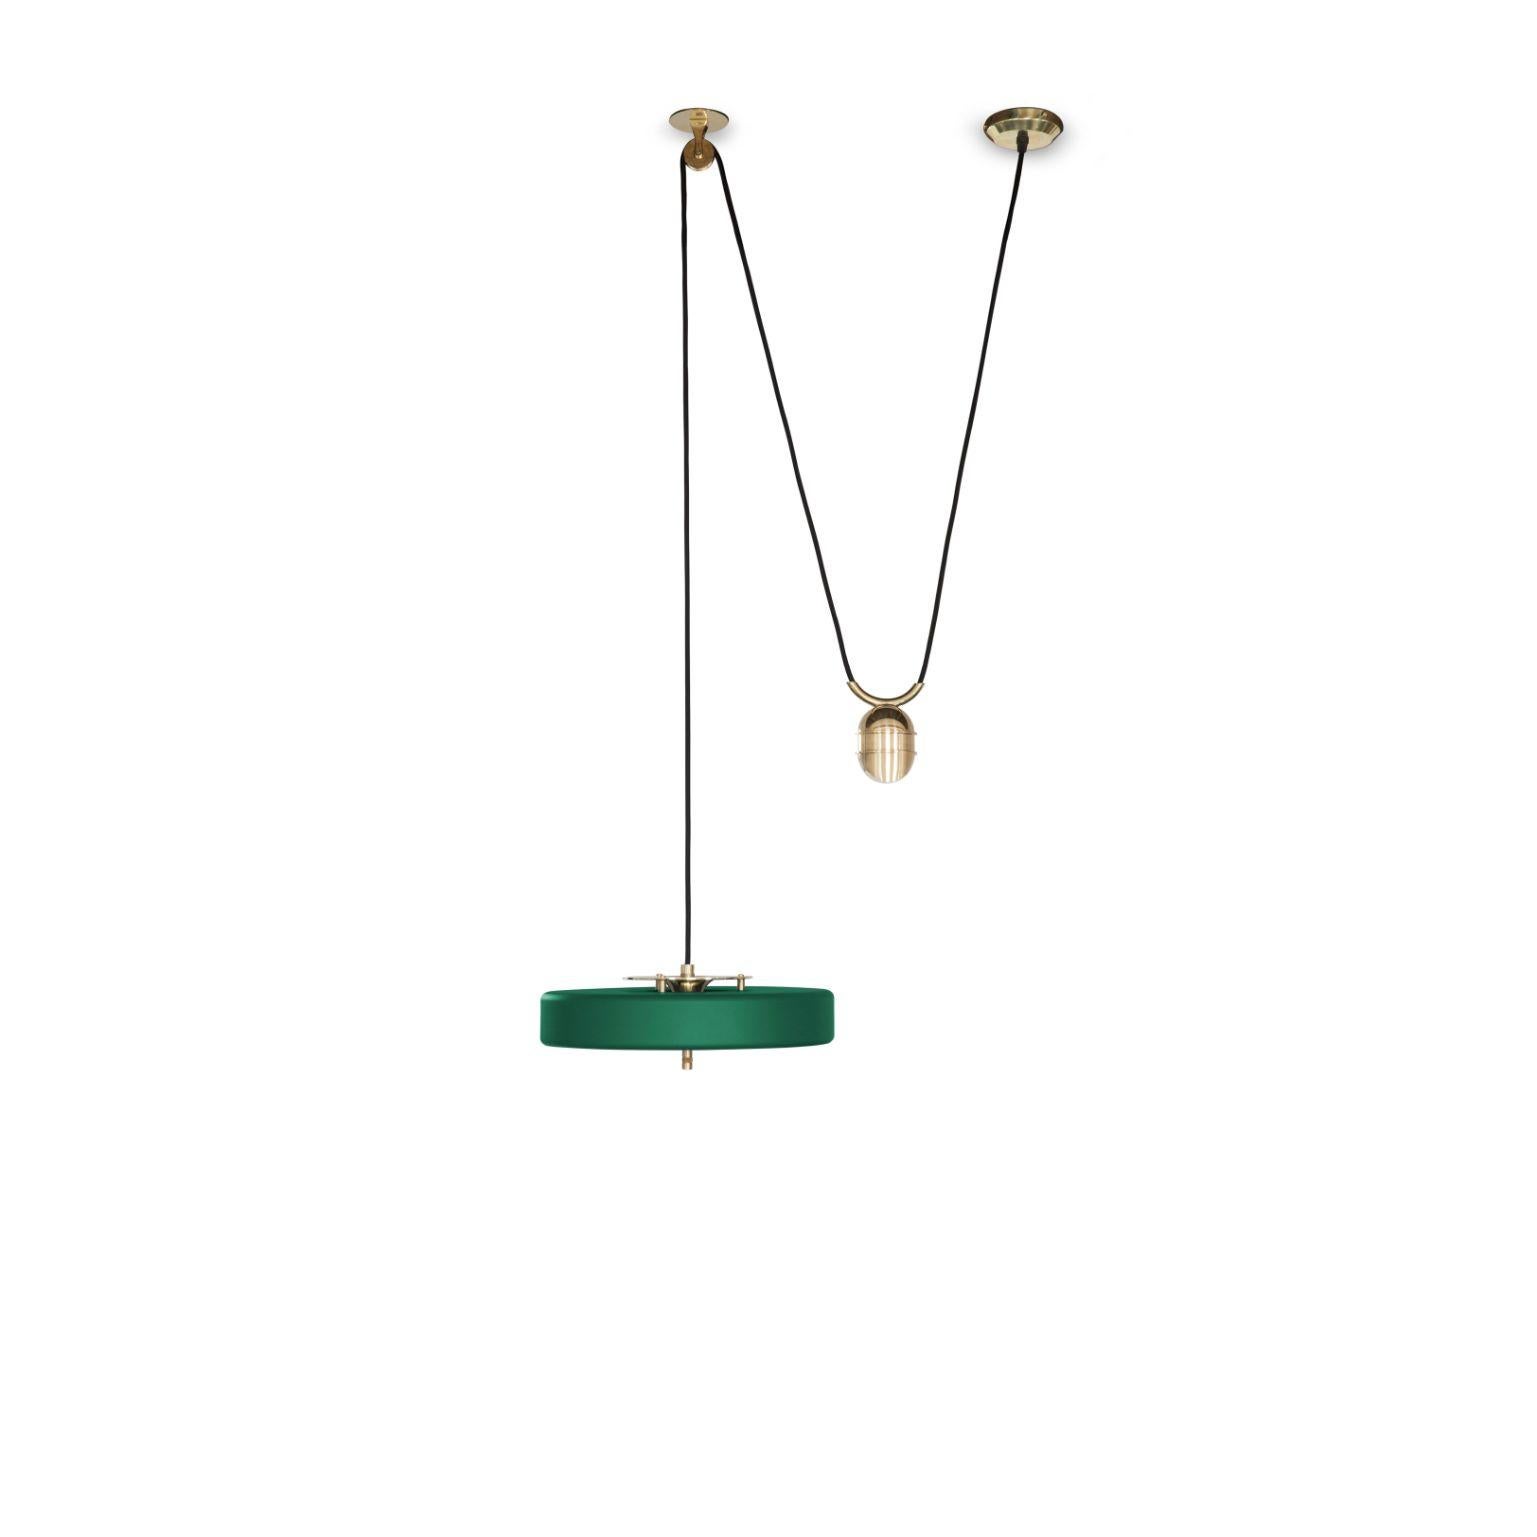 Revolve rise and fall pendant light, polished brass, green by Bert Frank
Dimensions: 30 x 35 x 11 cm, small lamp: 7.6 cm
Materials: Brass, steel

  
When Adam Yeats and Robbie Llewellyn founded Bert Frank in 2013 it was a meeting of minds and